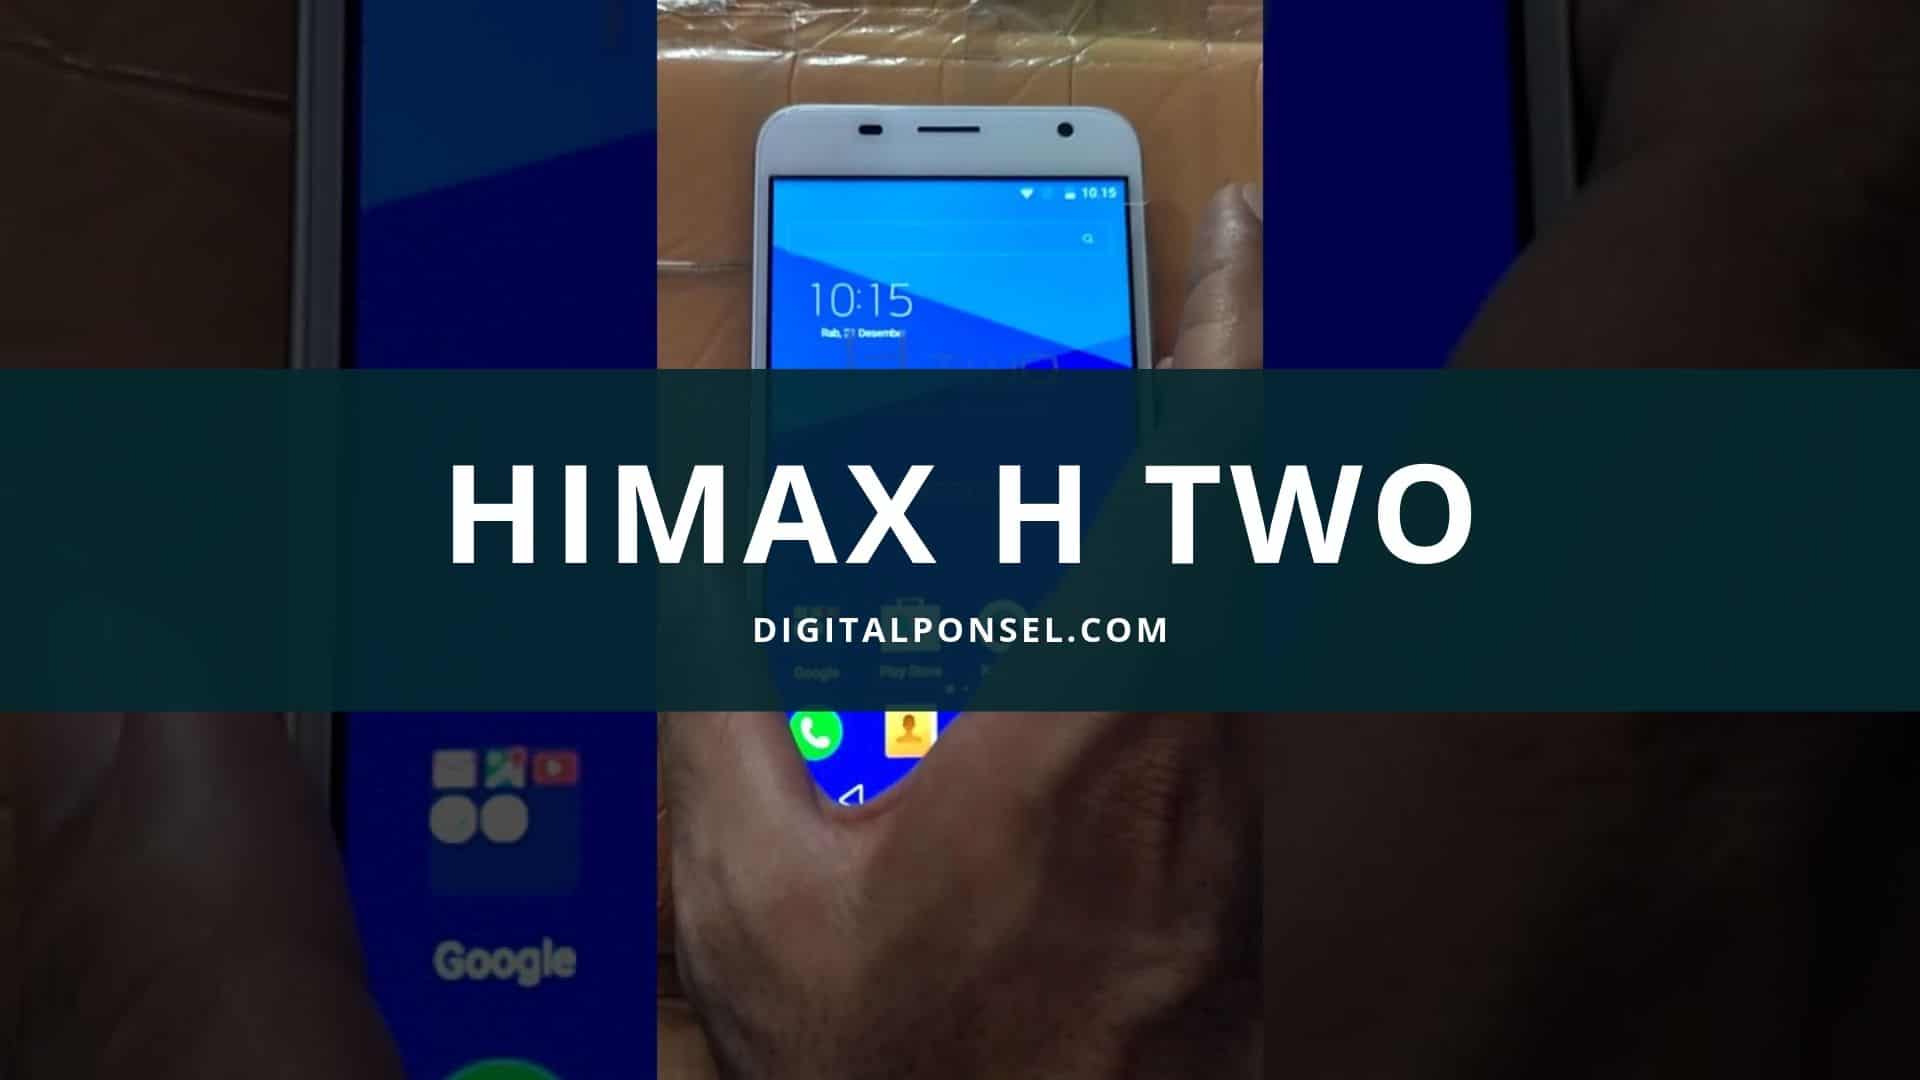 Himax H Two